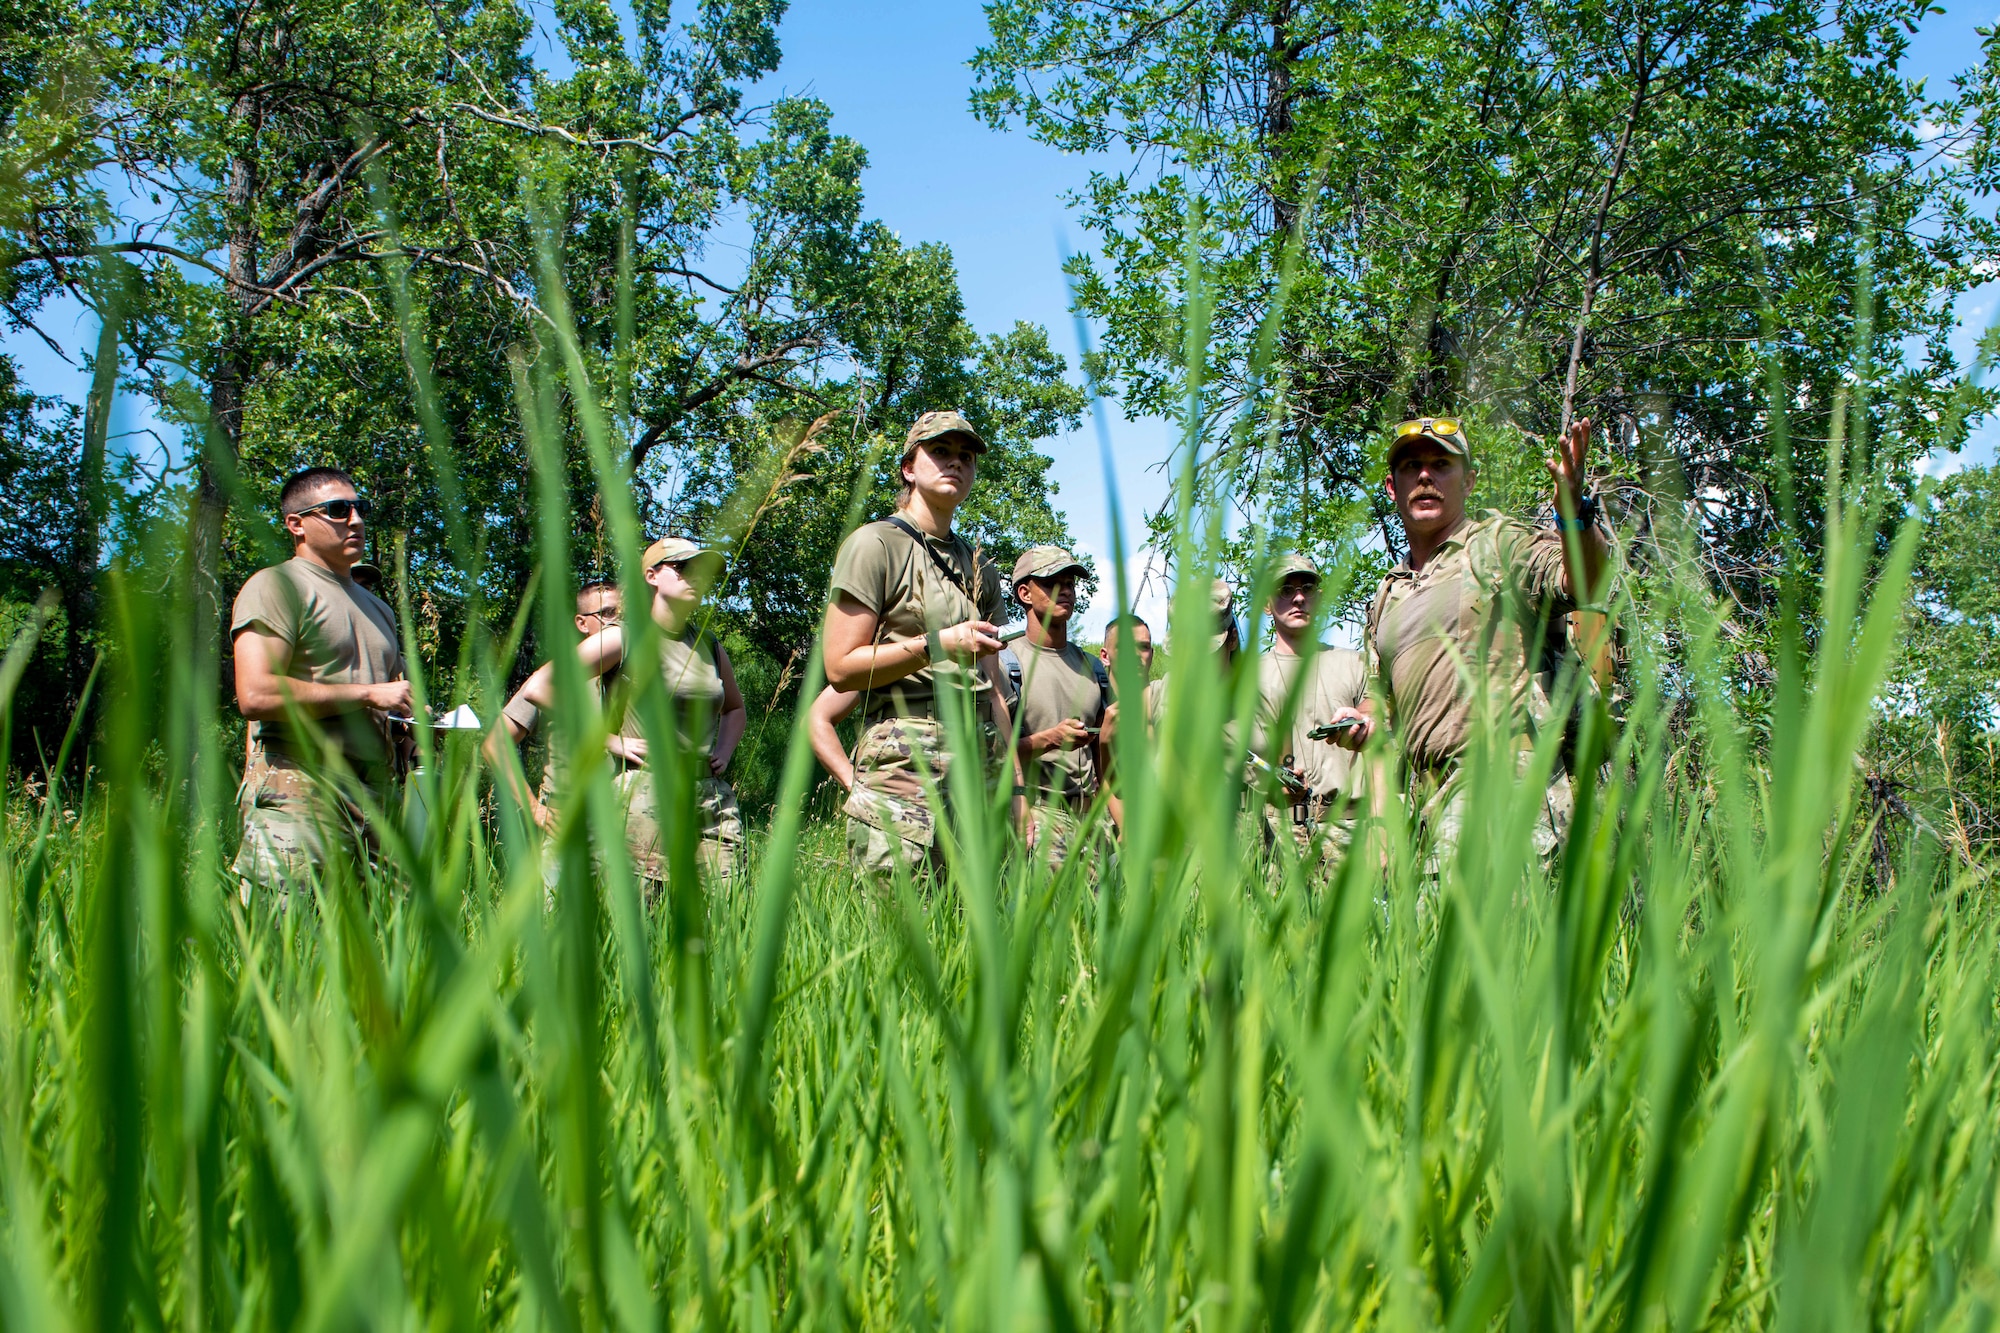 U.S. Air Force Airmen assigned to the 28th Bomb Wing participate in the first iteration of the Ellsworth Outdoor Survival Skills Course, at the Fort Meade Training Area, S.D., July 21, 2022.